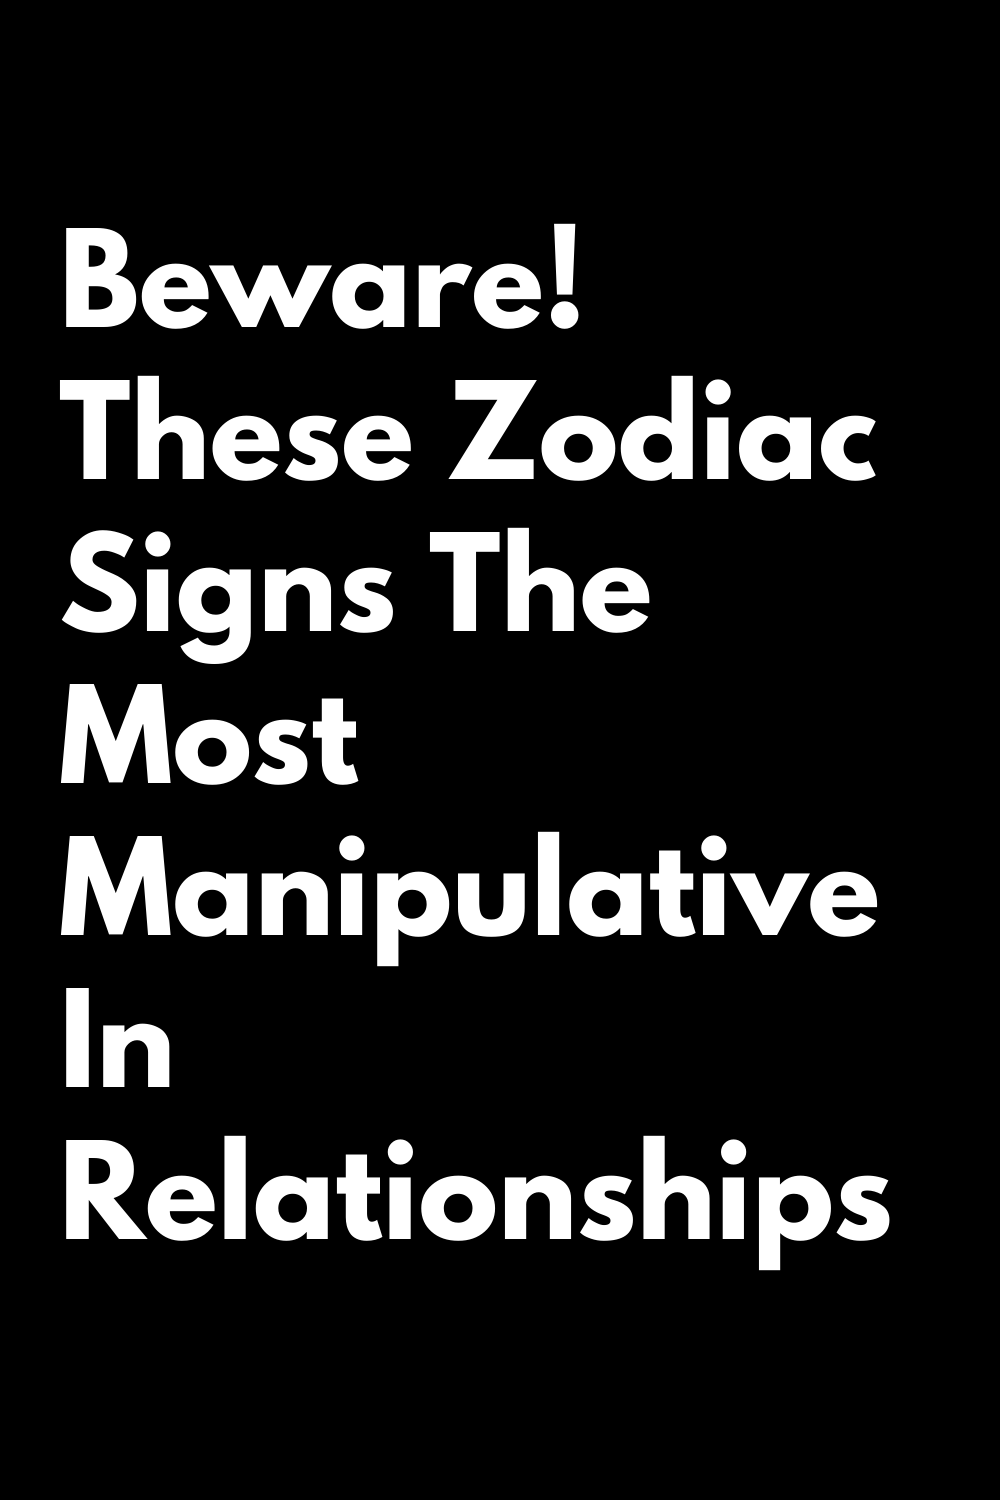 Beware! These Zodiac Signs The Most Manipulative In Relationships ...